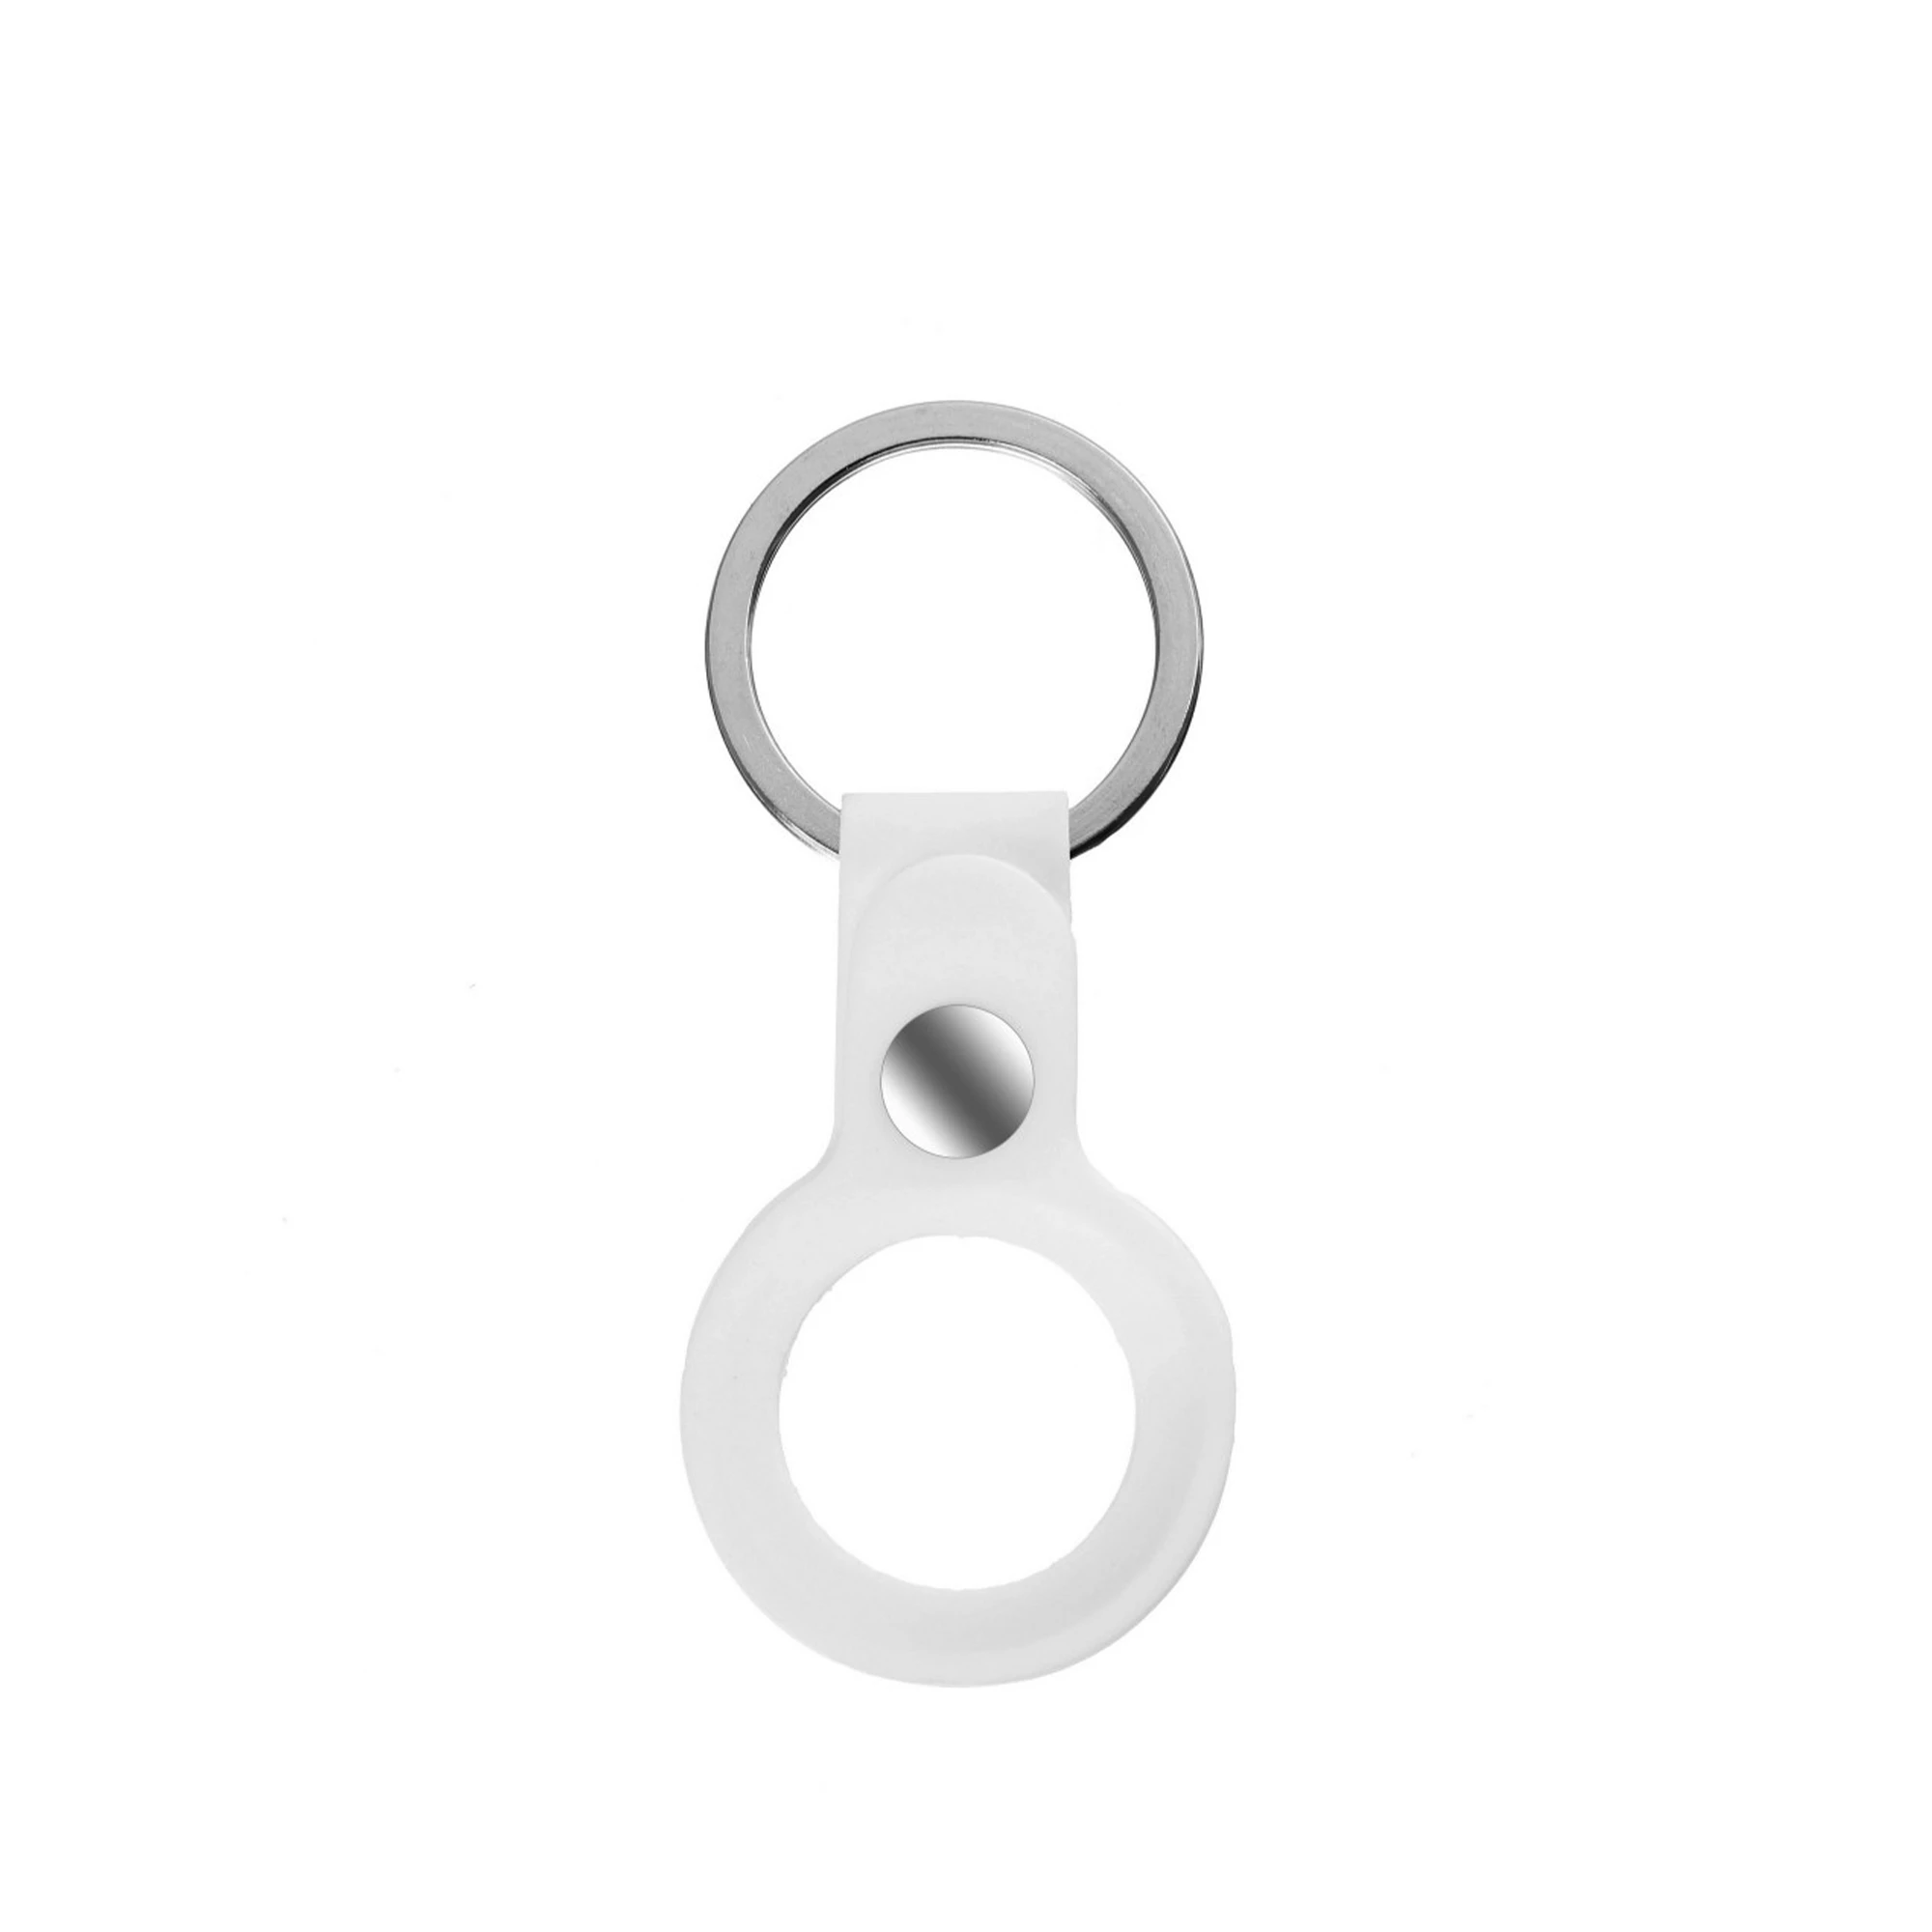 AirTag Silicone Key Ring Lux Copy White